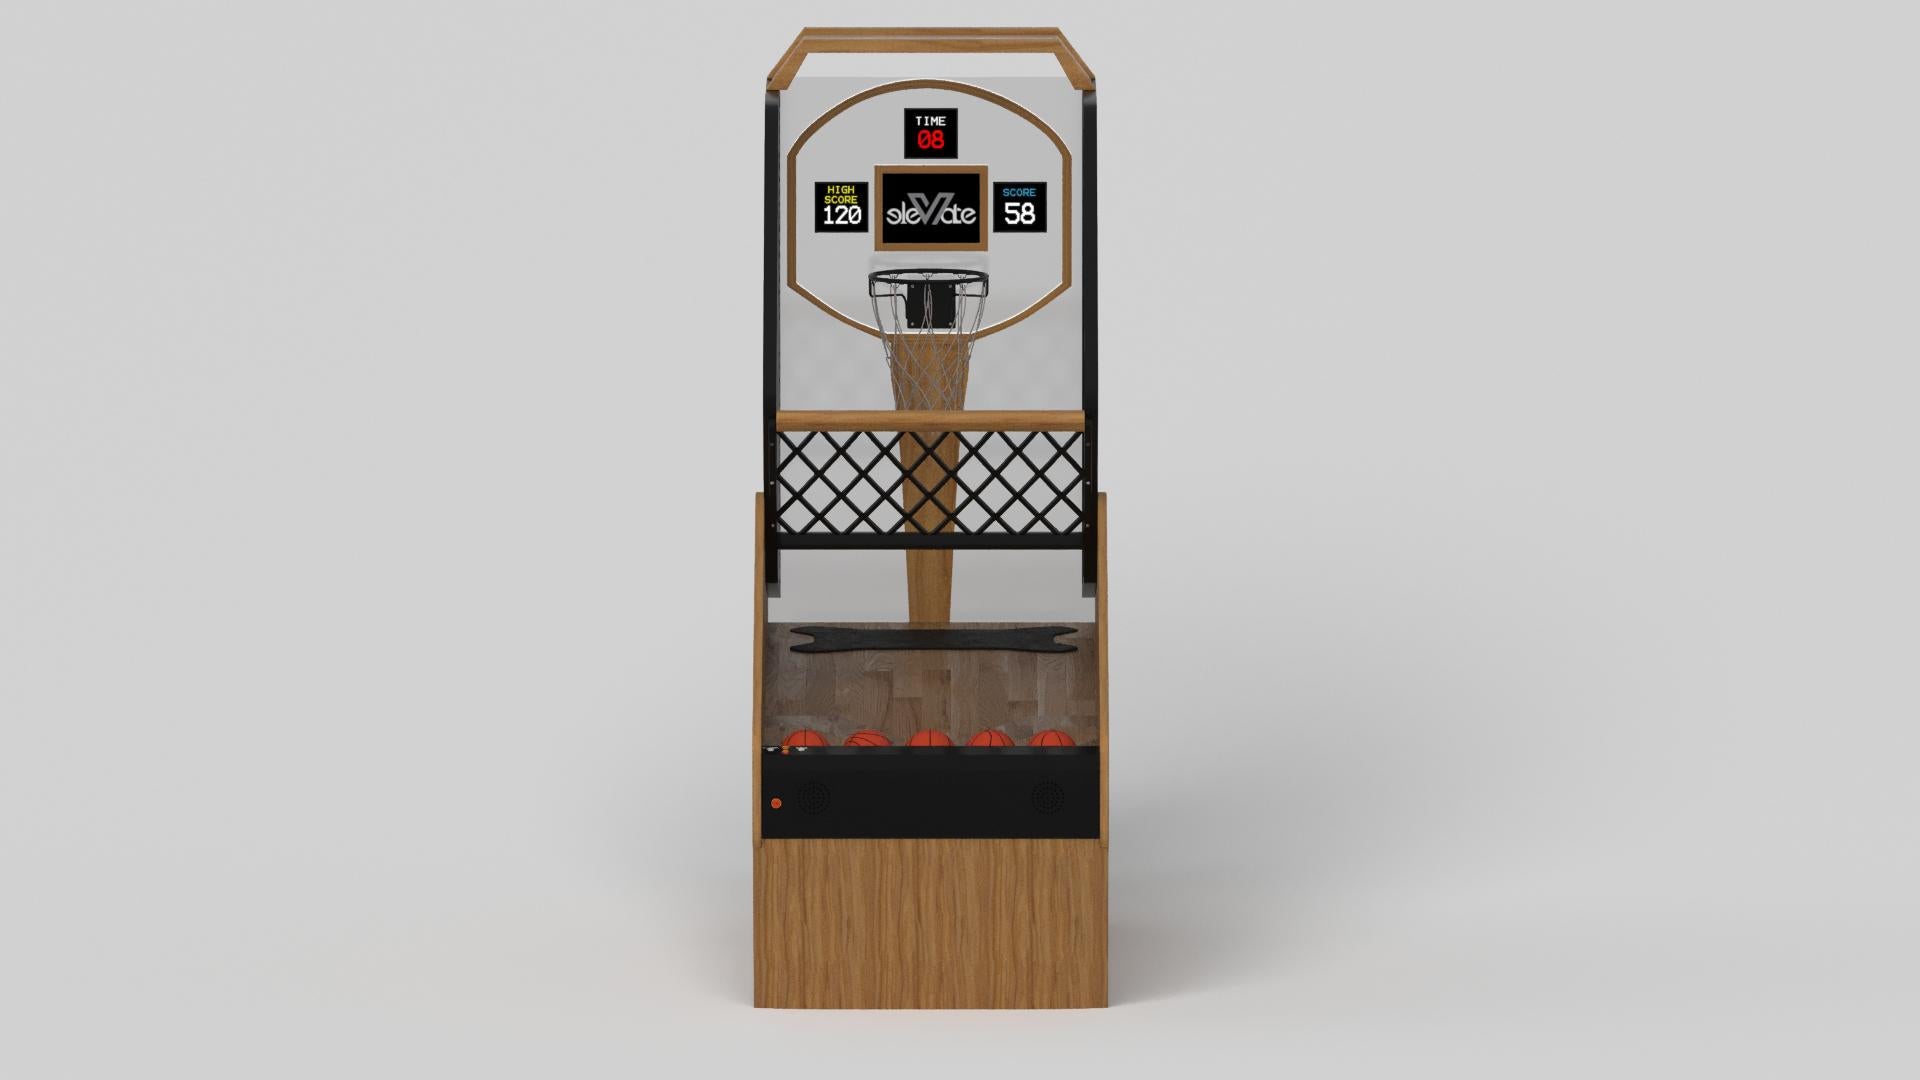 With a combination of acute angles, smooth lines, and geometric configurations, the Maze basketball game is characterized by a labyrinth-inspired base with a mystifying motif. Detailed with built-in digital components, this luxury wood game exudes